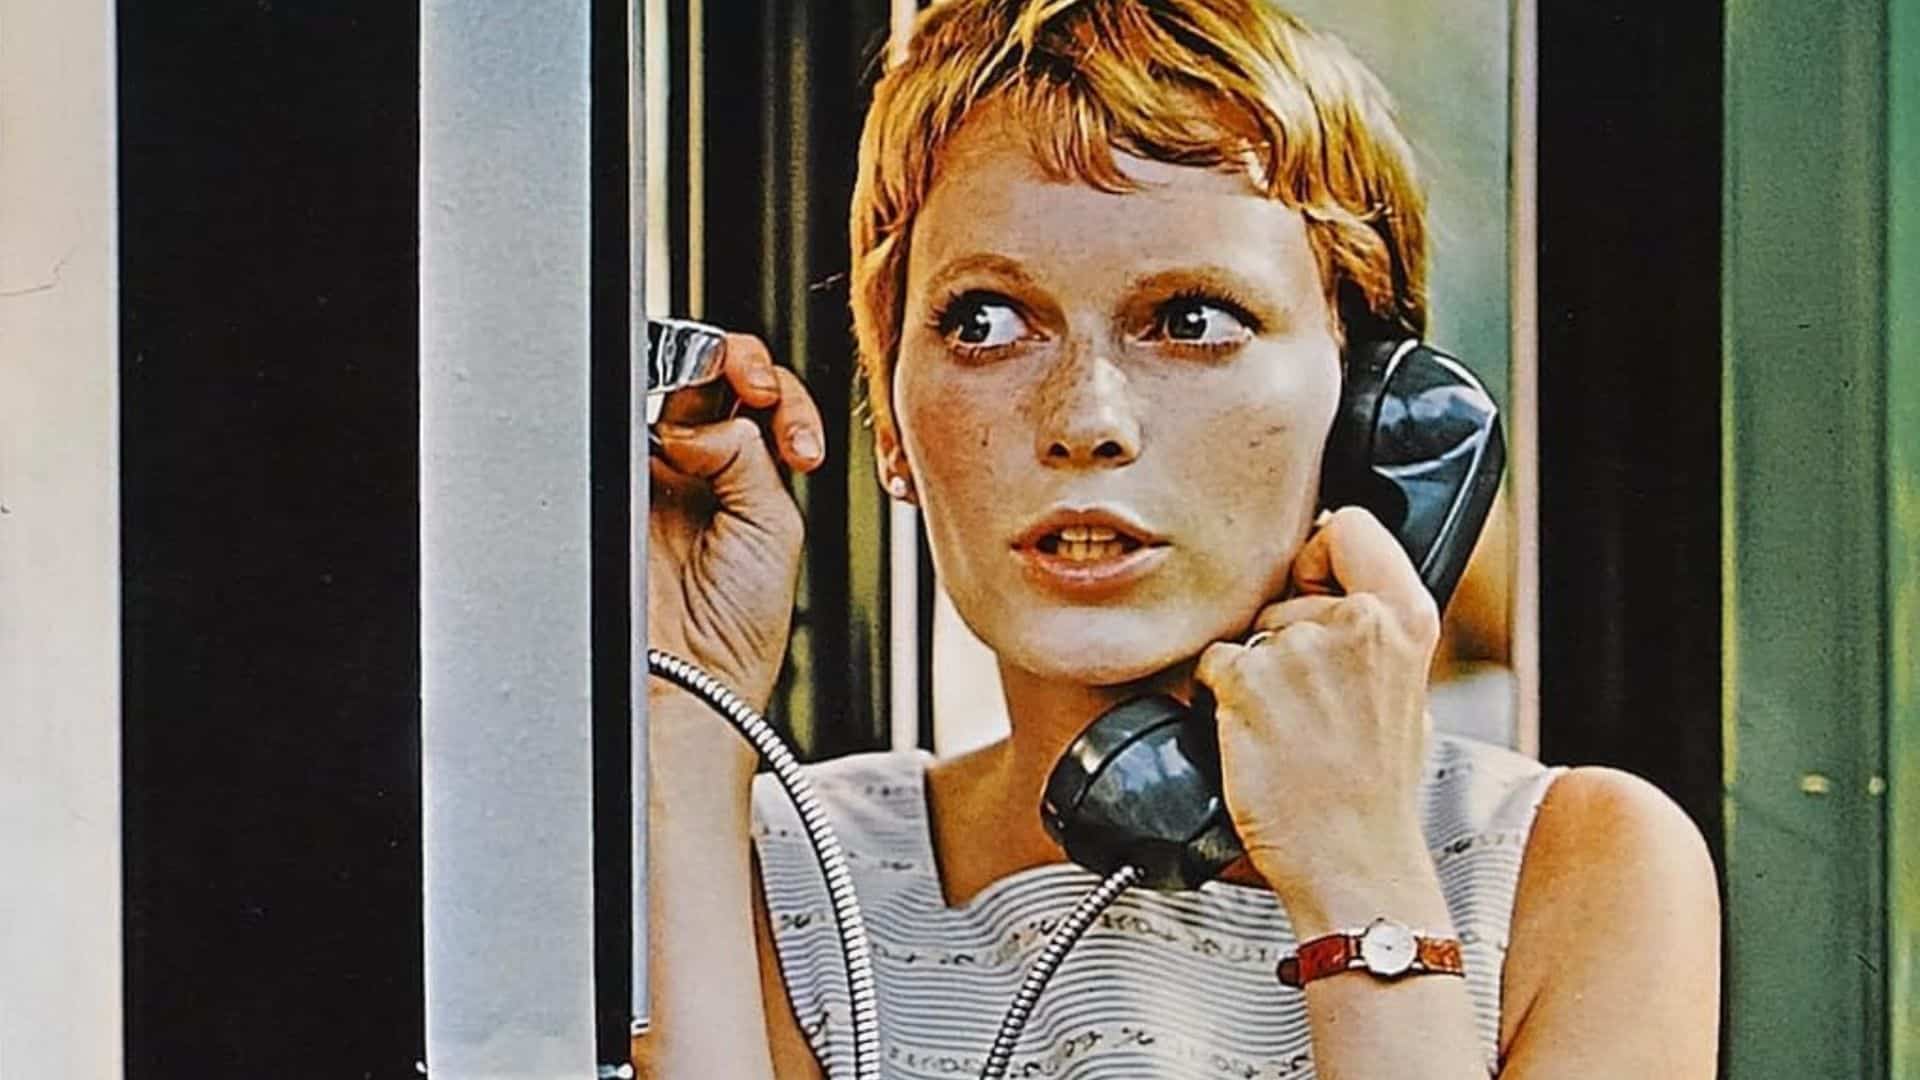 A woman talks on a pay phone in this image from William Castle Enterprises.